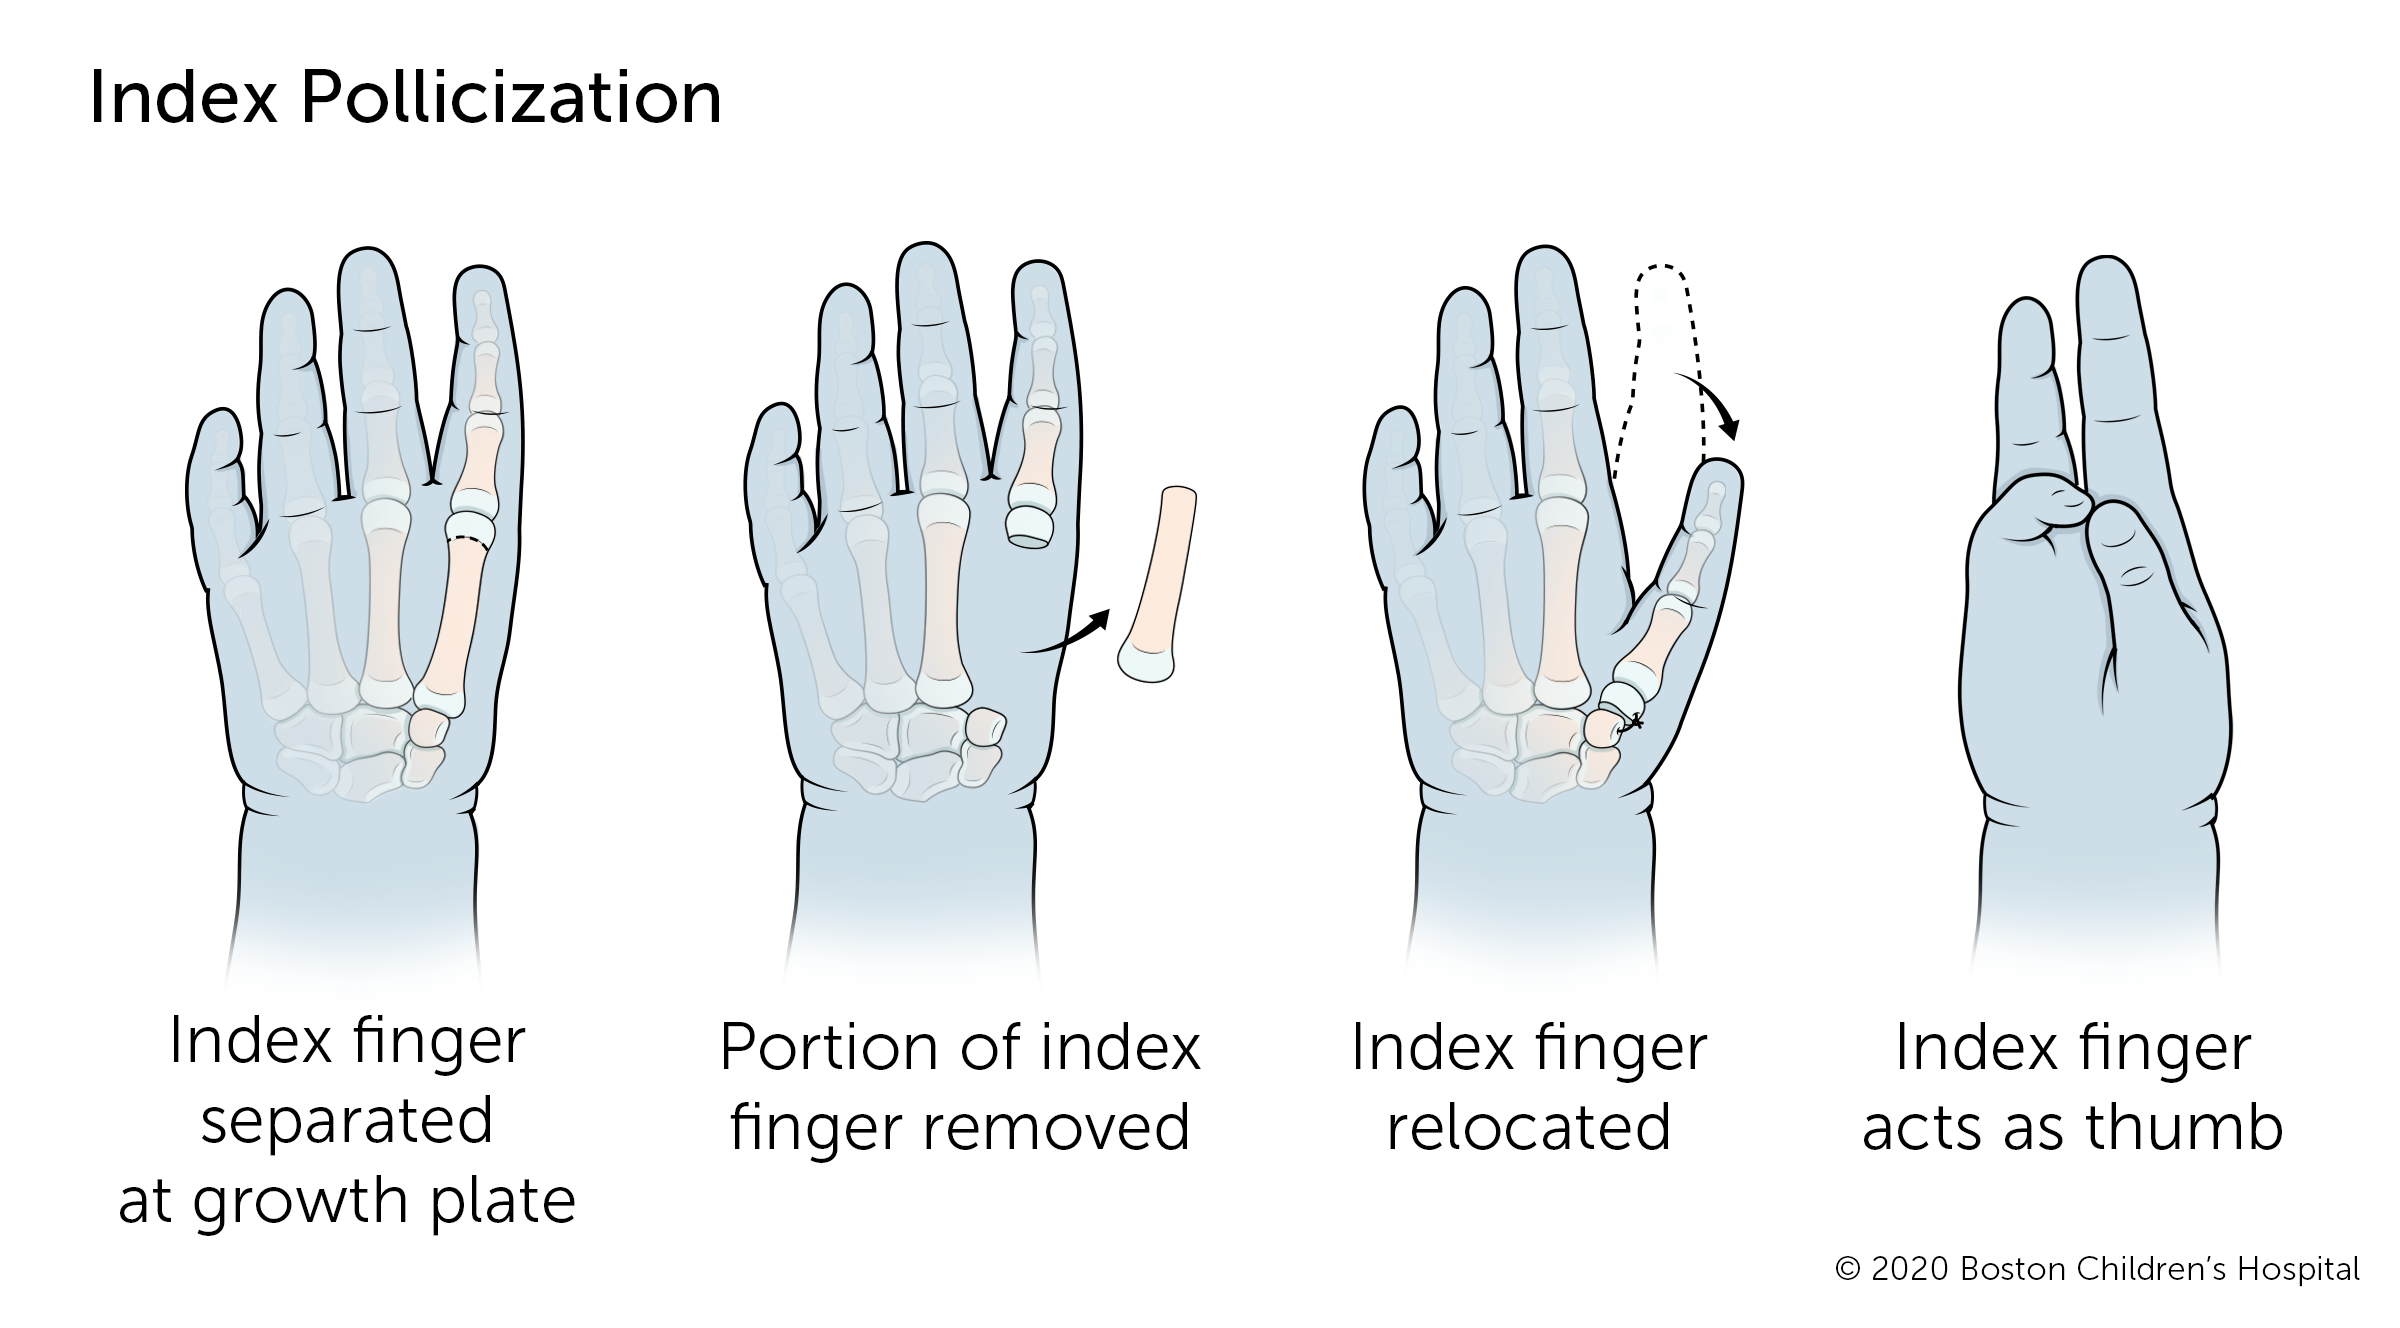 If the thumb is completely missing, index pollicization surgery moves the index finger into the thumb position. The index finger is separated at the growth plate, a section of the finger is removed from the hand, and the remaining finger is relocated to where it can serve as a thumb.